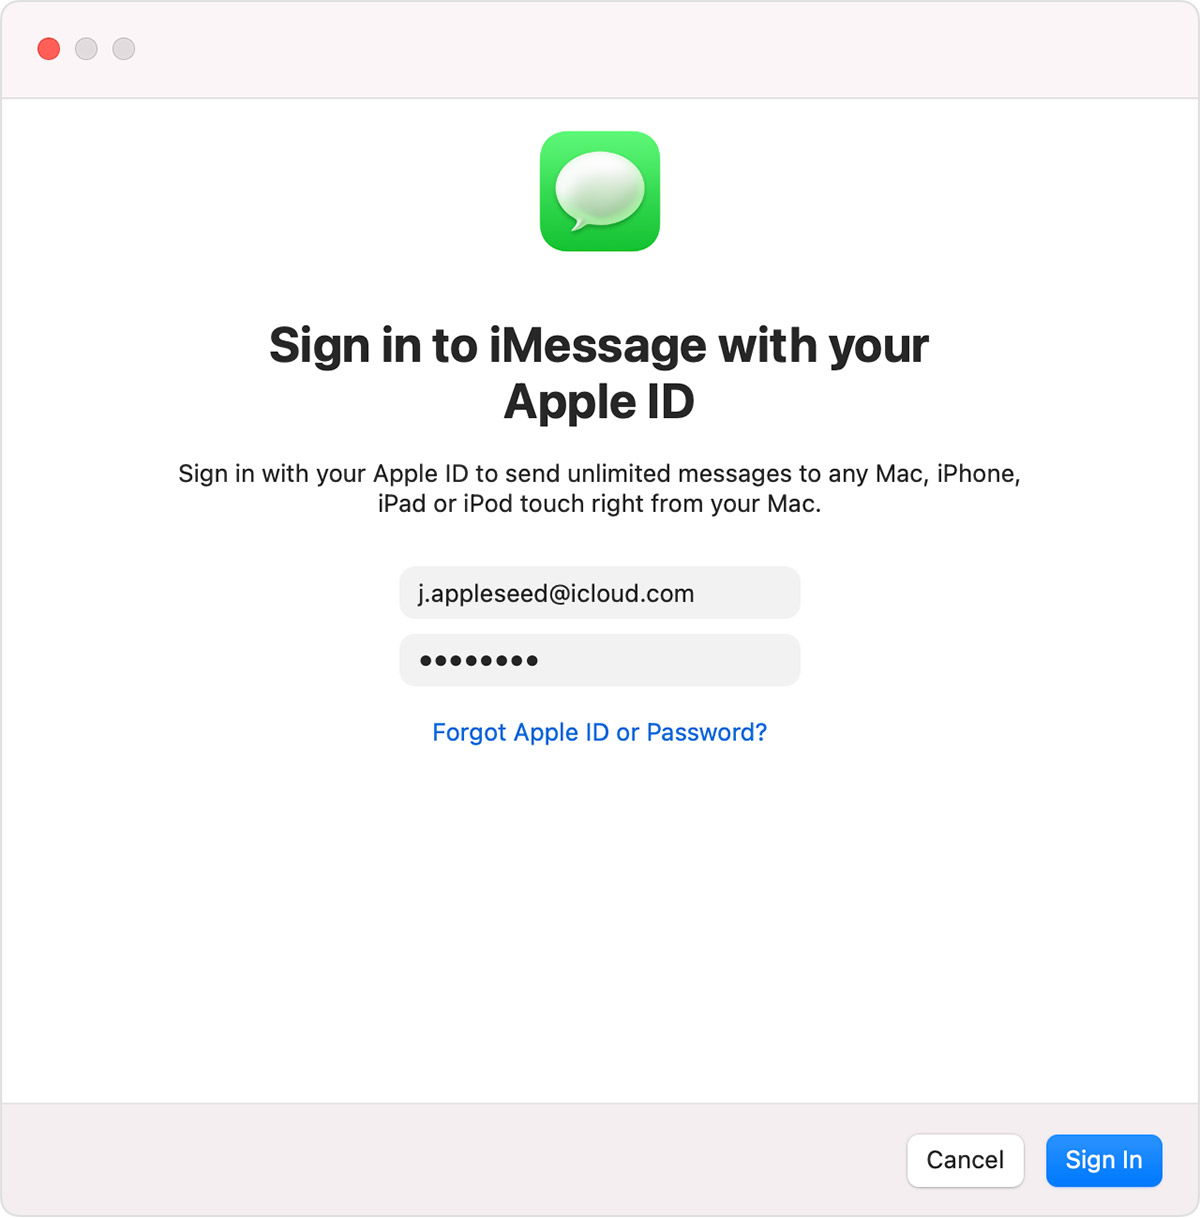 mac os no setting for text message forwarding